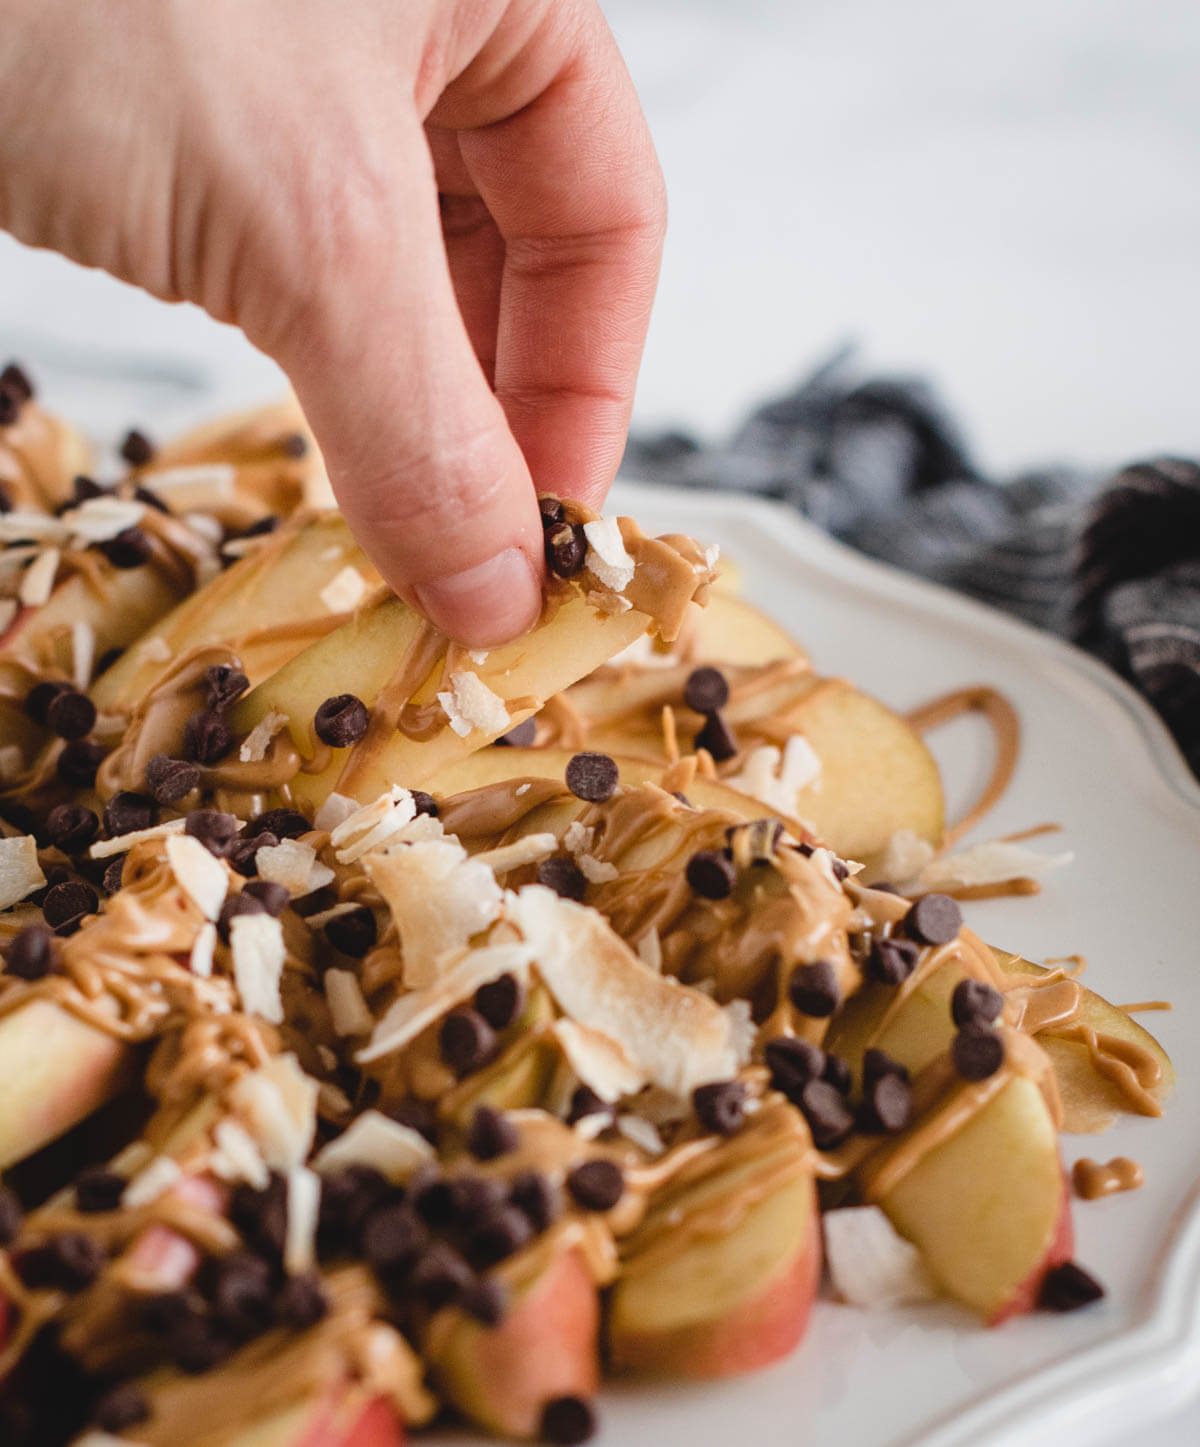 A hand picking up a slice of apple drizzled in peanut butter and chocolate chips